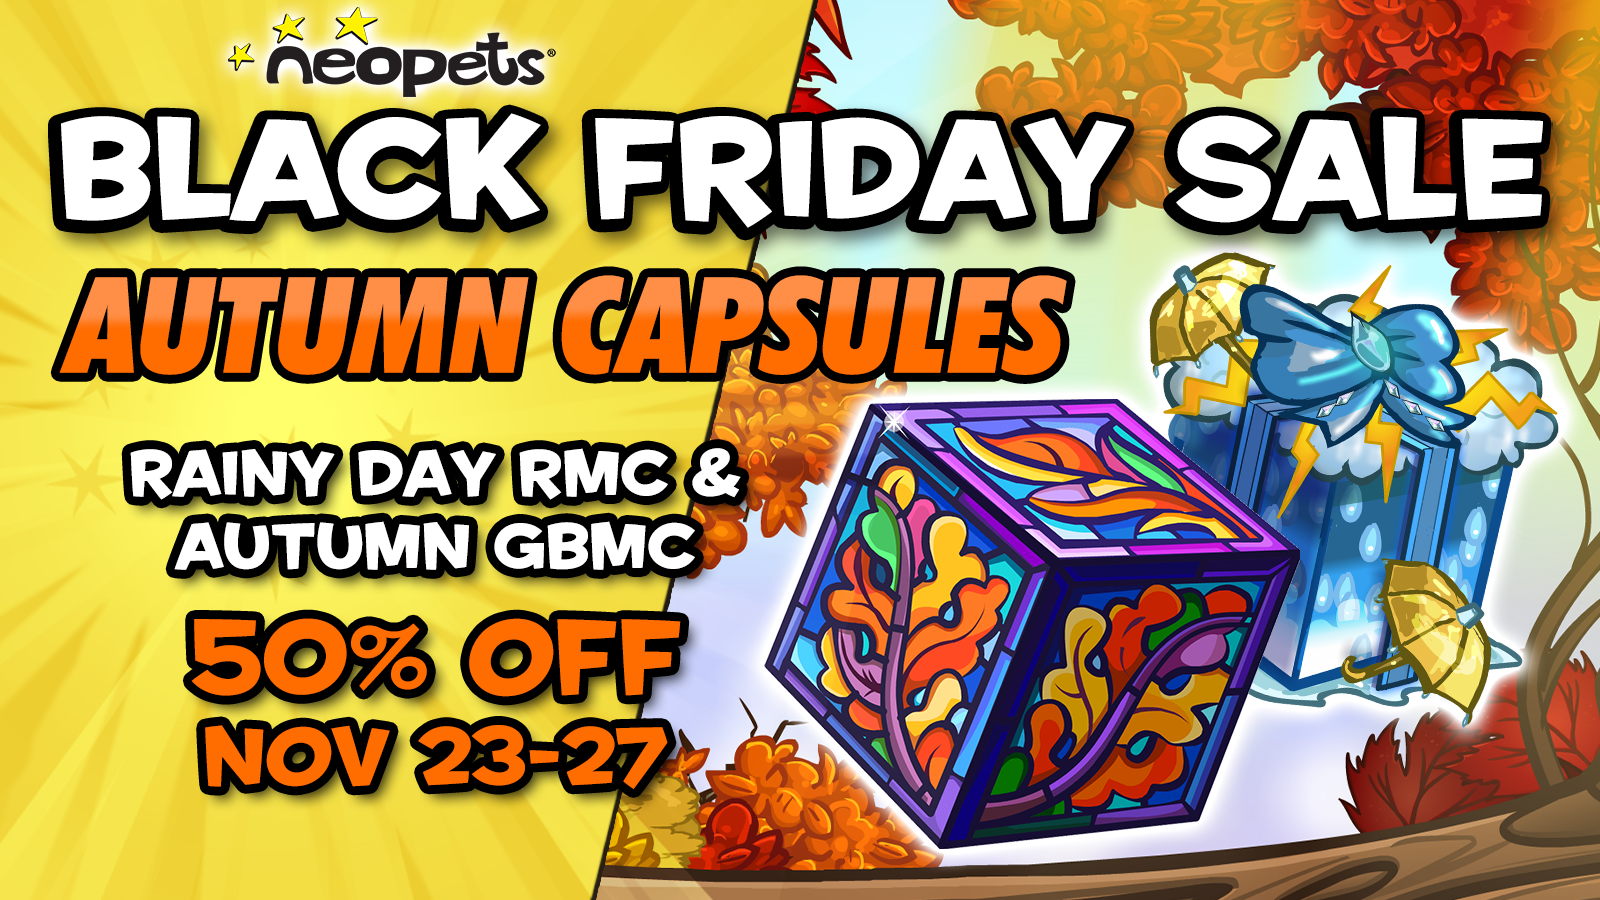 https://images.neopets.com/homepage/notice/banner/blackfriday_fallcaps.png